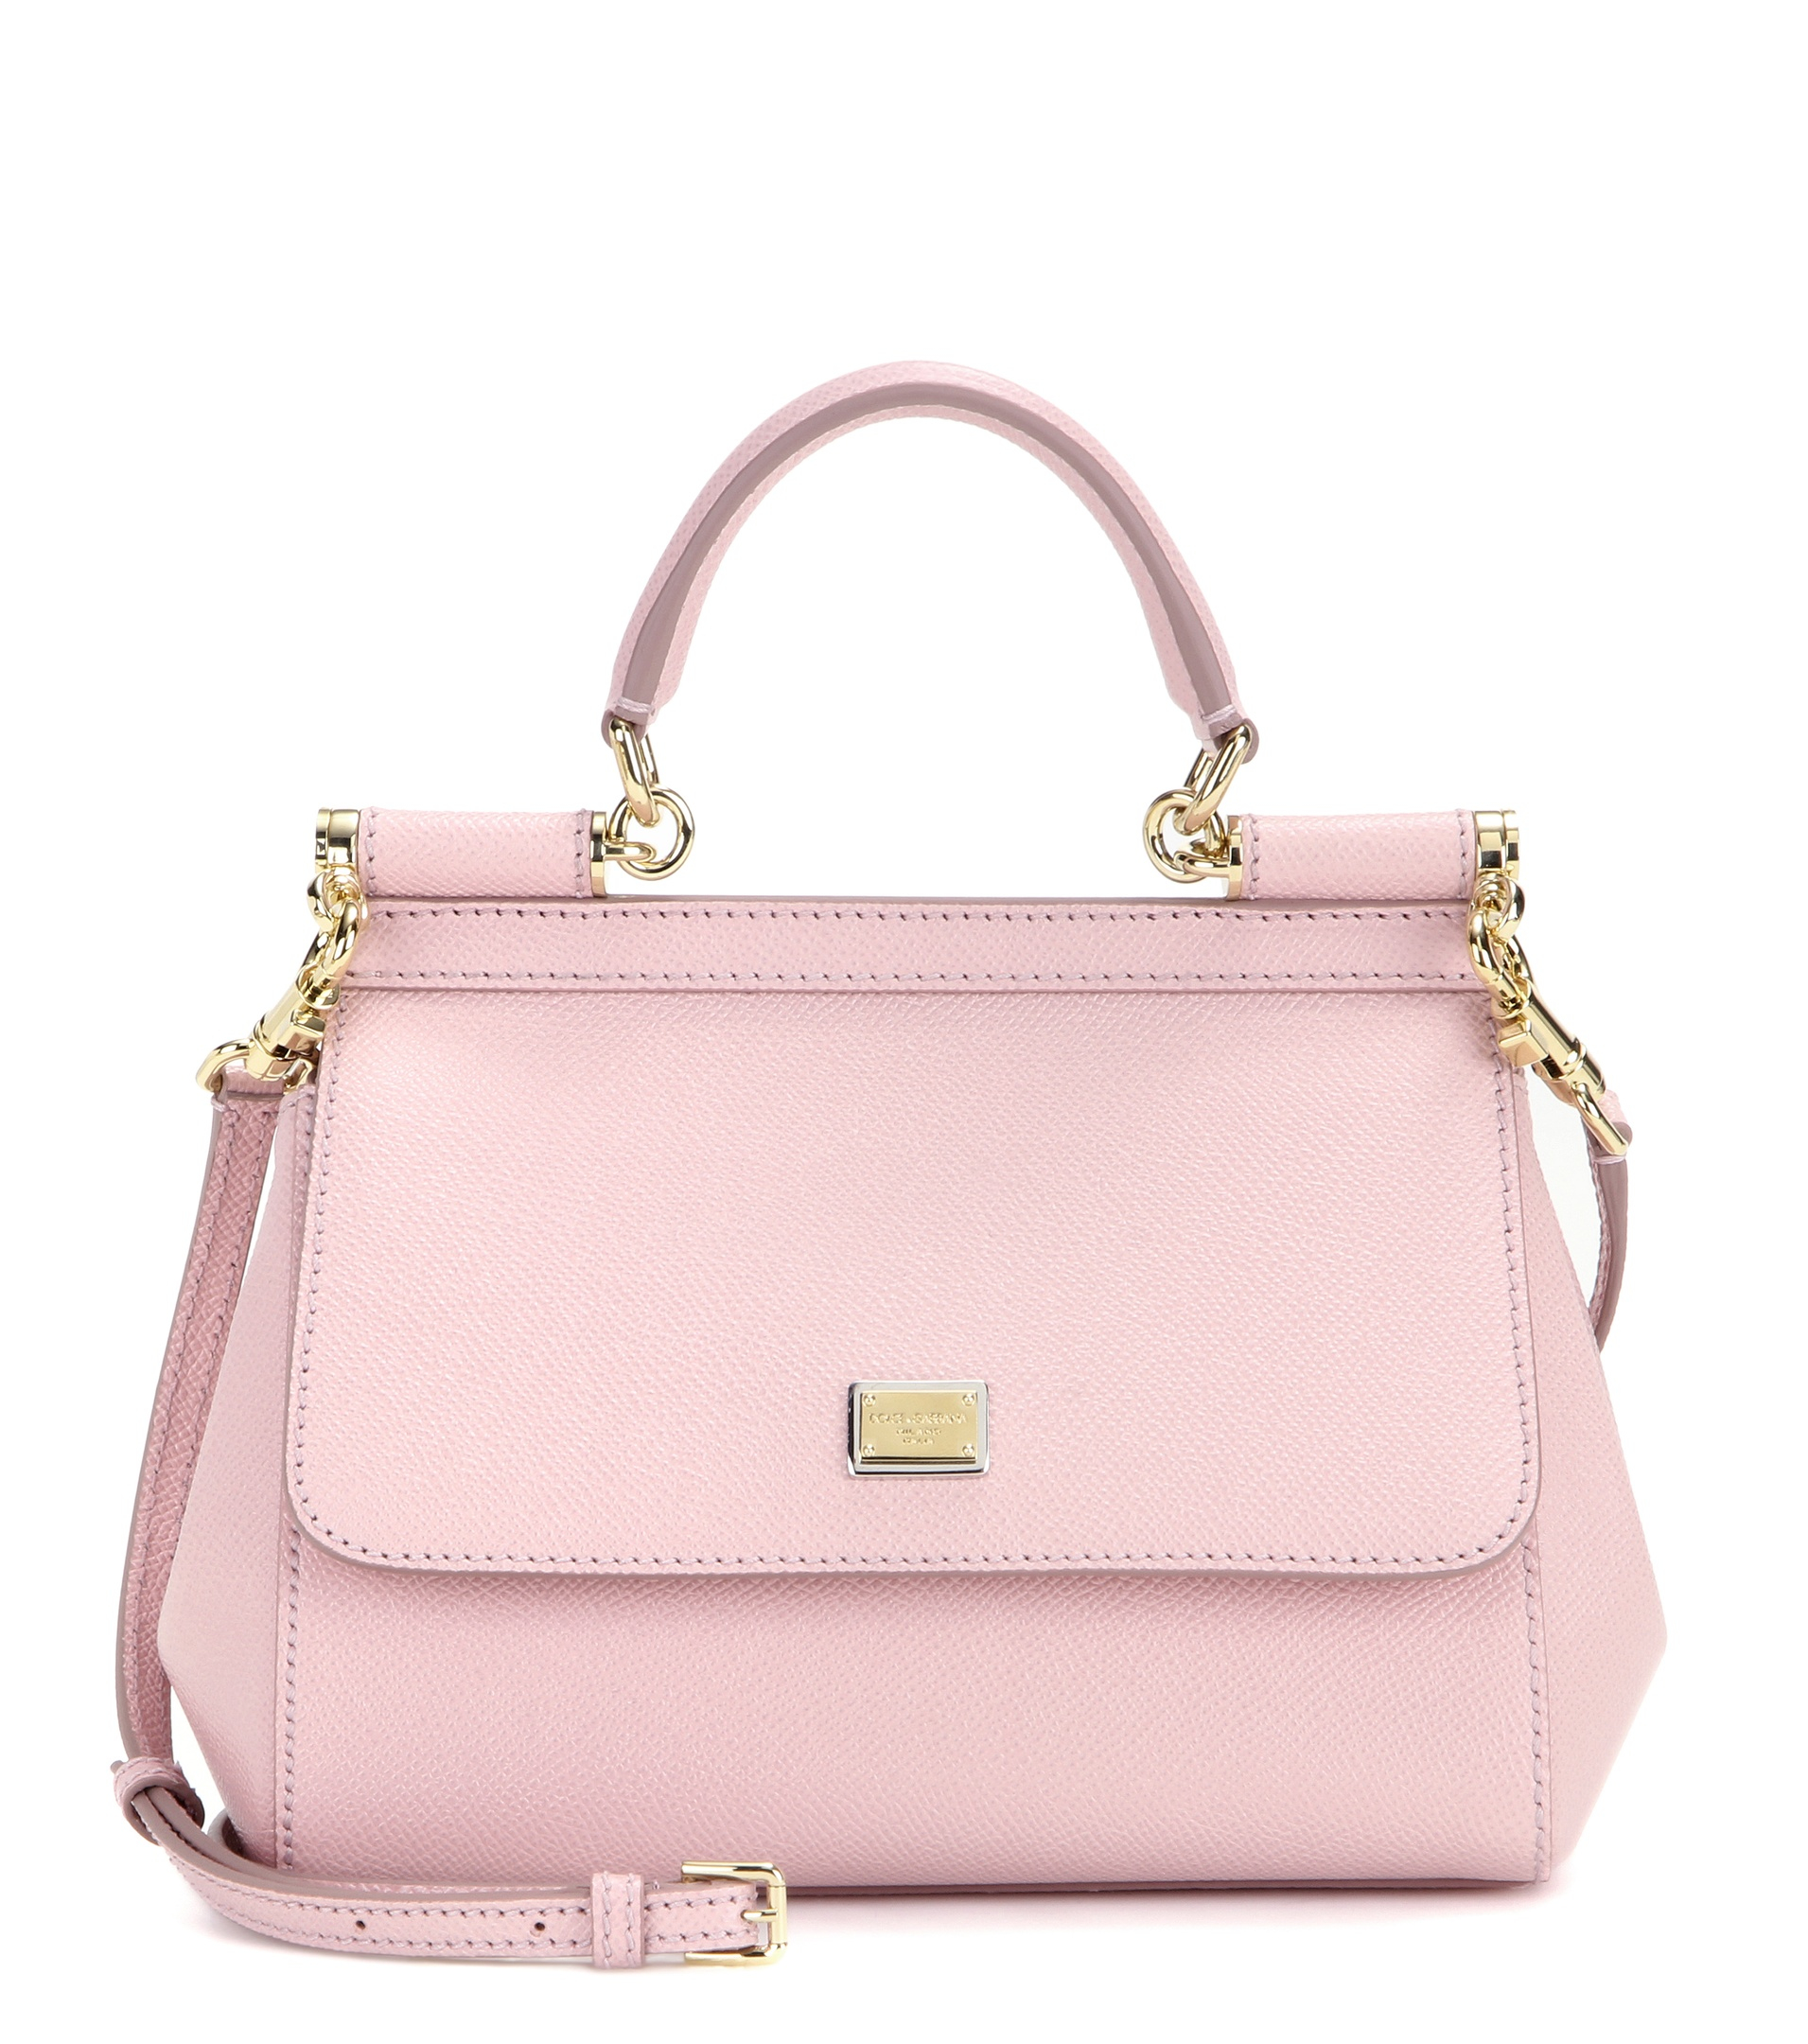 Dolce & gabbana Sicily Small Leather Shoulder Bag in Pink | Lyst